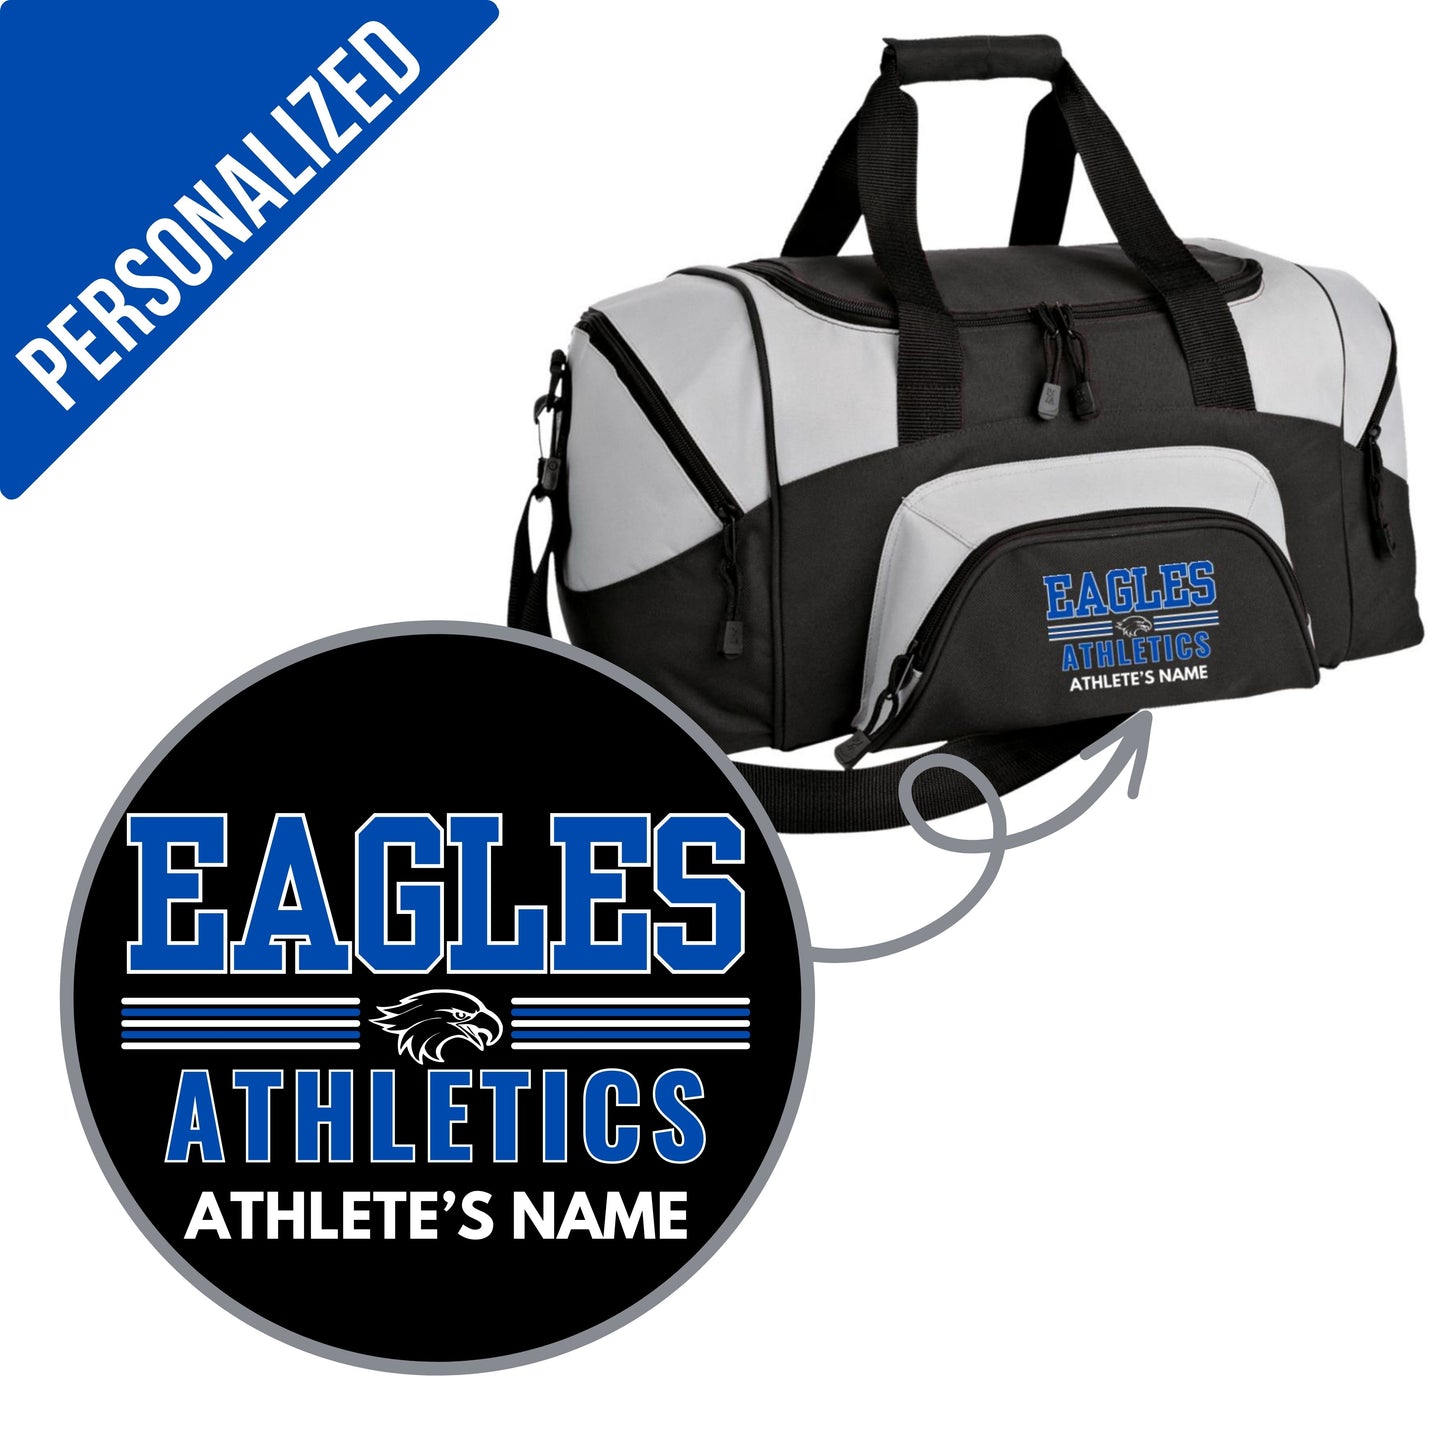 Eagles Athletics Bags- Personalized